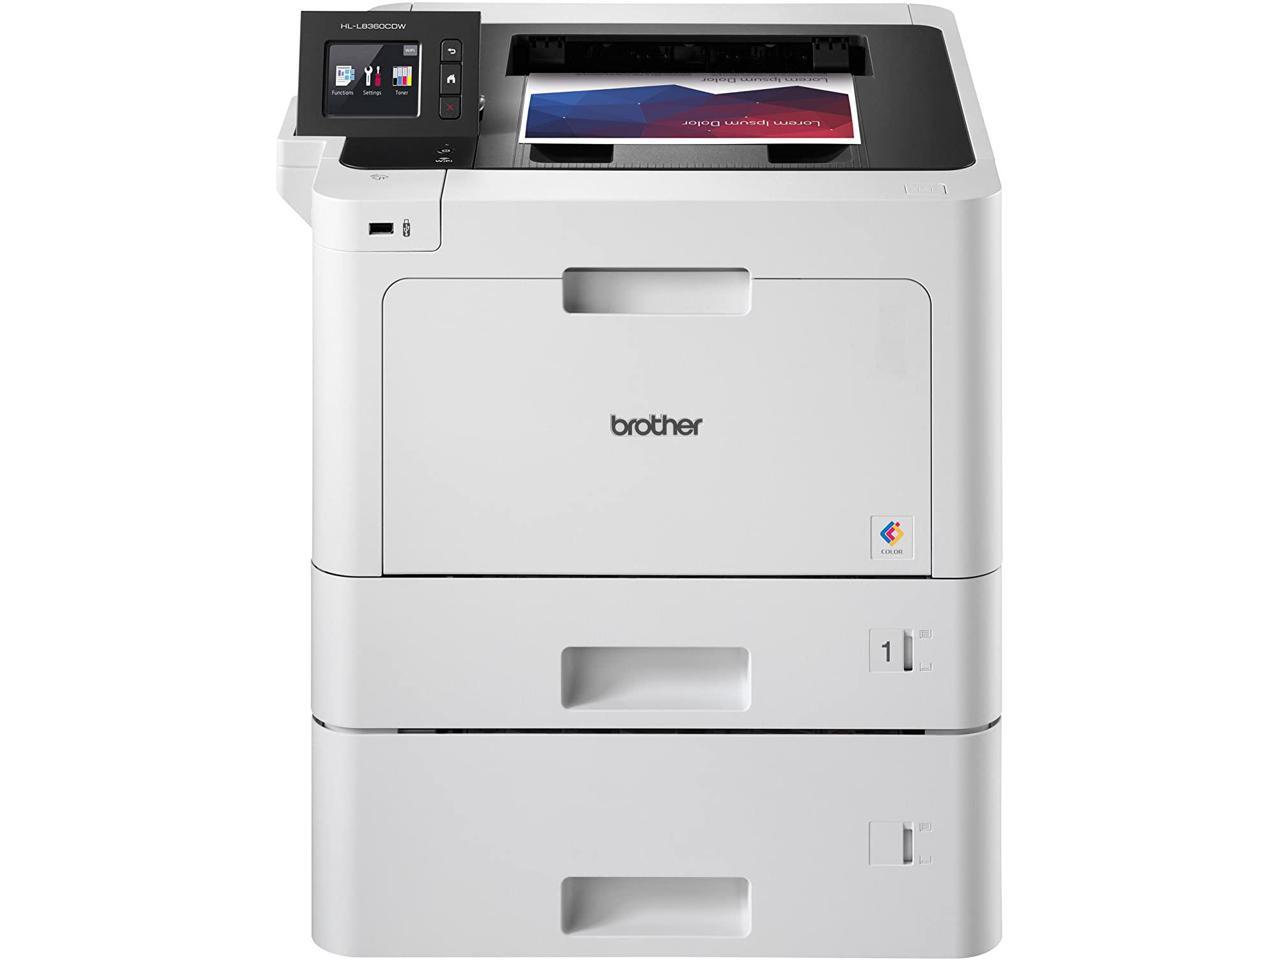 Brother Business Color Laser Printer, HL-L8360CDWT, Wireless Networking, Automatic Duplex Printing, Mobile Printing, Cloud Printing